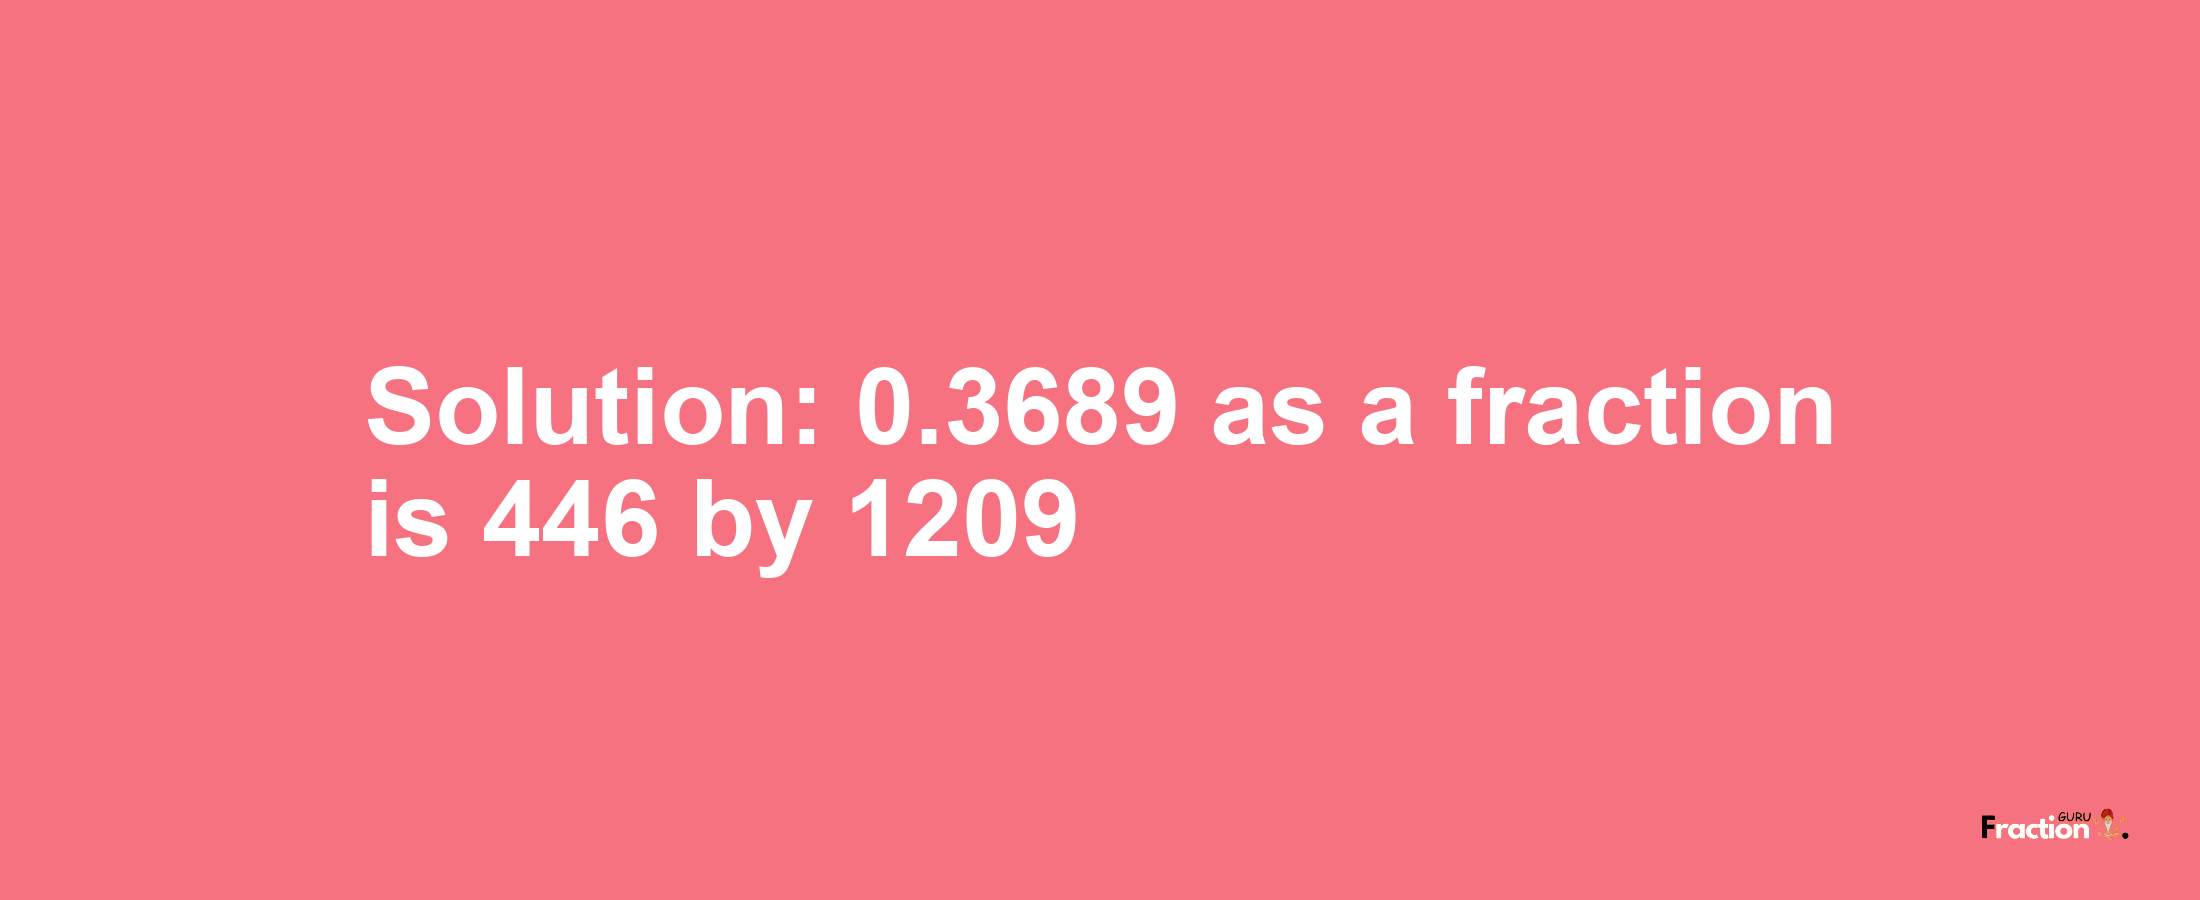 Solution:0.3689 as a fraction is 446/1209